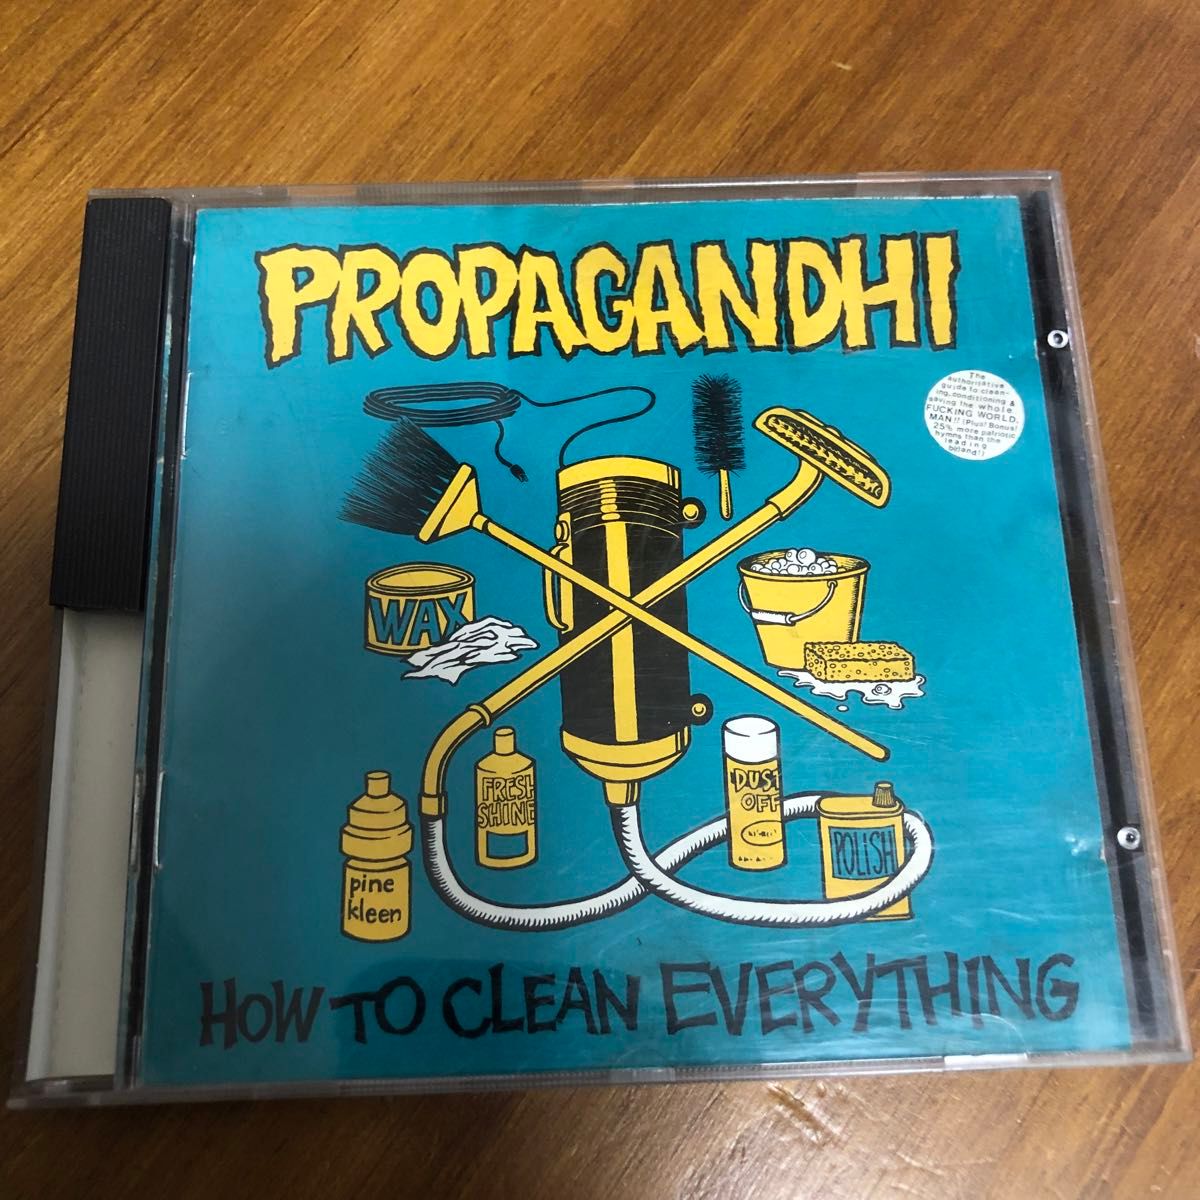 CD PROPAGANDHI HOW TO clean everything NOFX RANCID